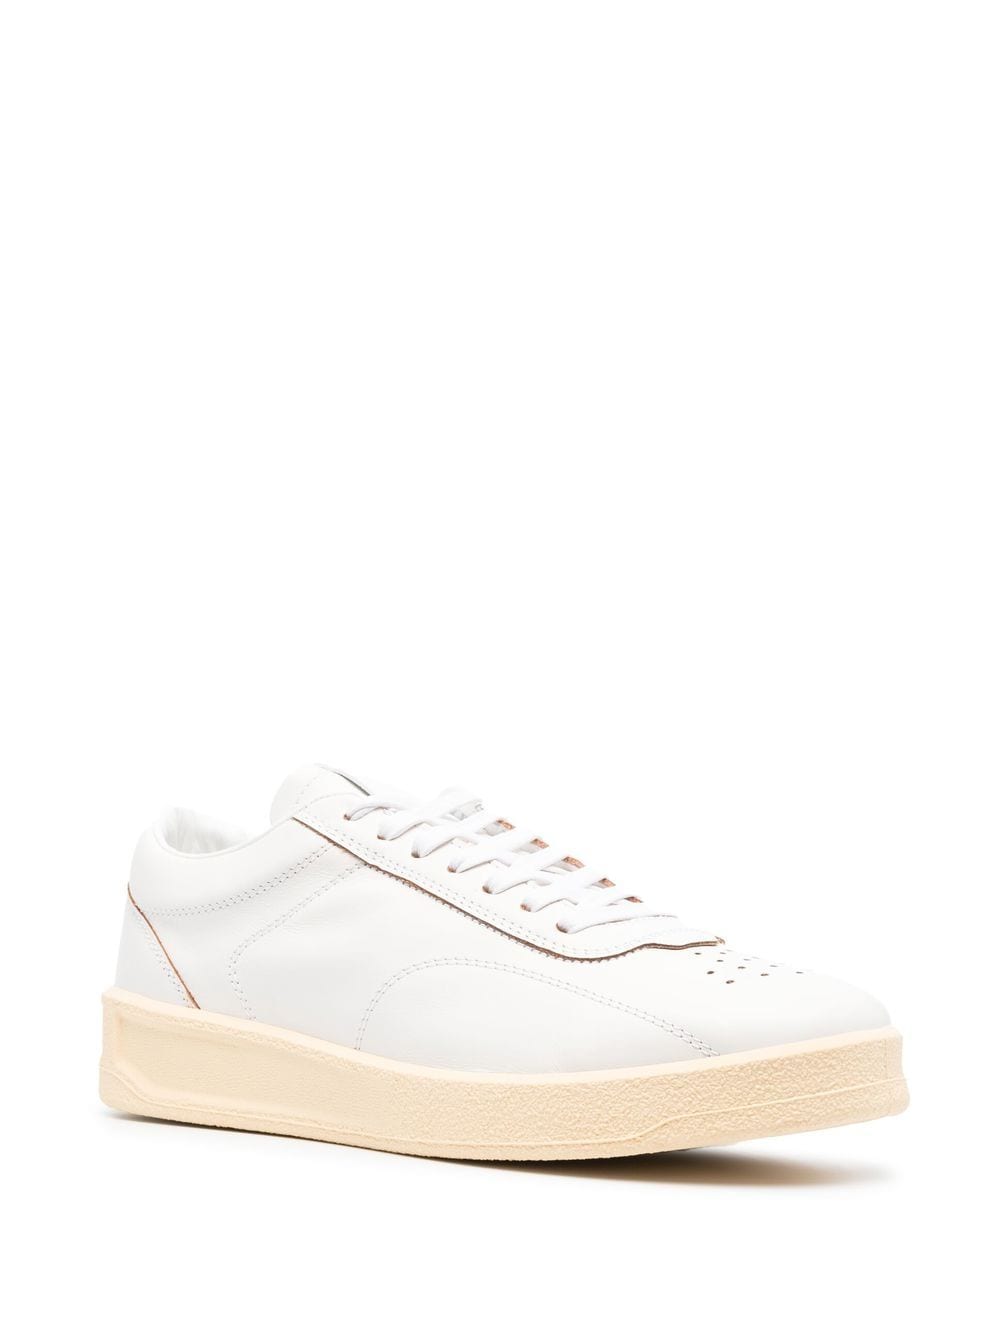 Image 2 of Jil Sander lace-up leather sneakers